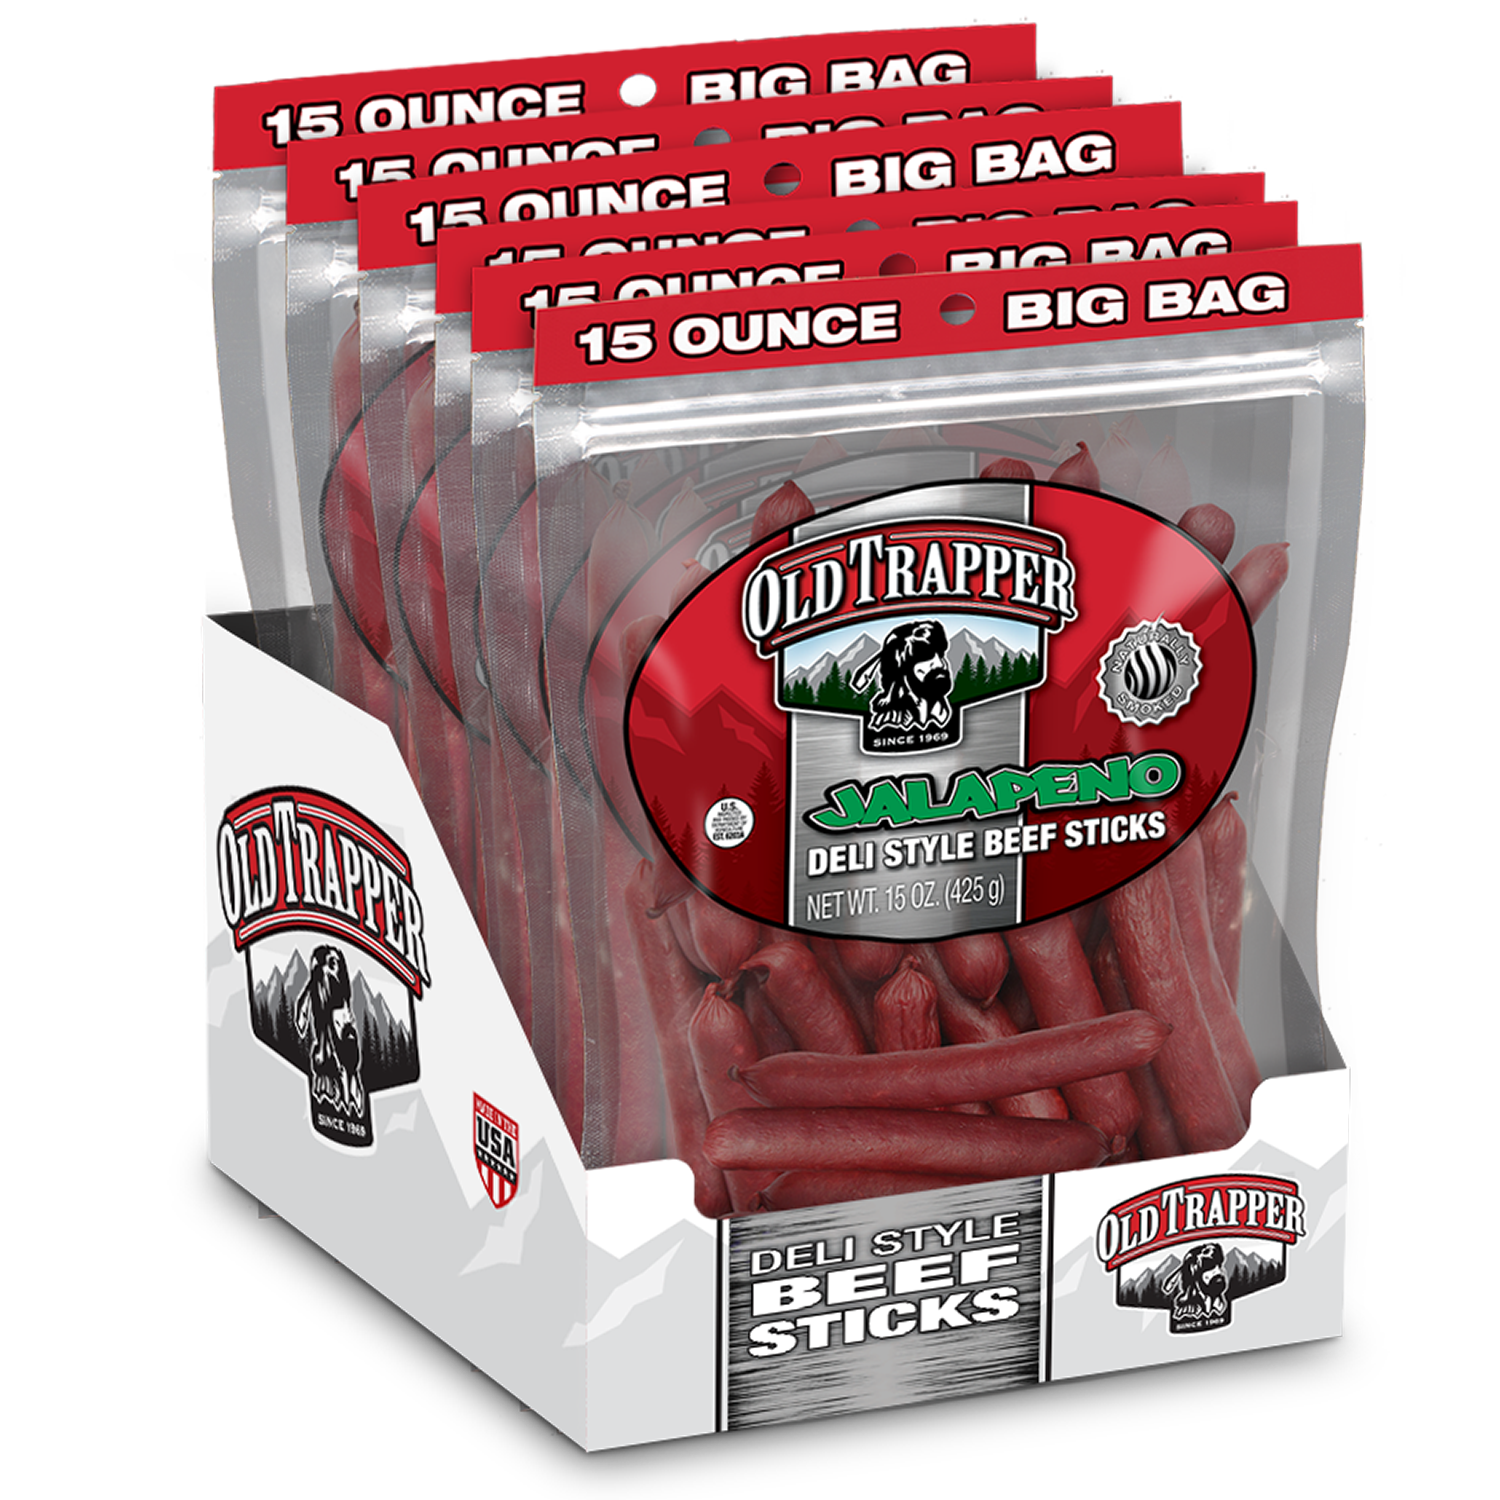 Case of 6 Packages -  Jalapeno Deli Style Beef Sticks